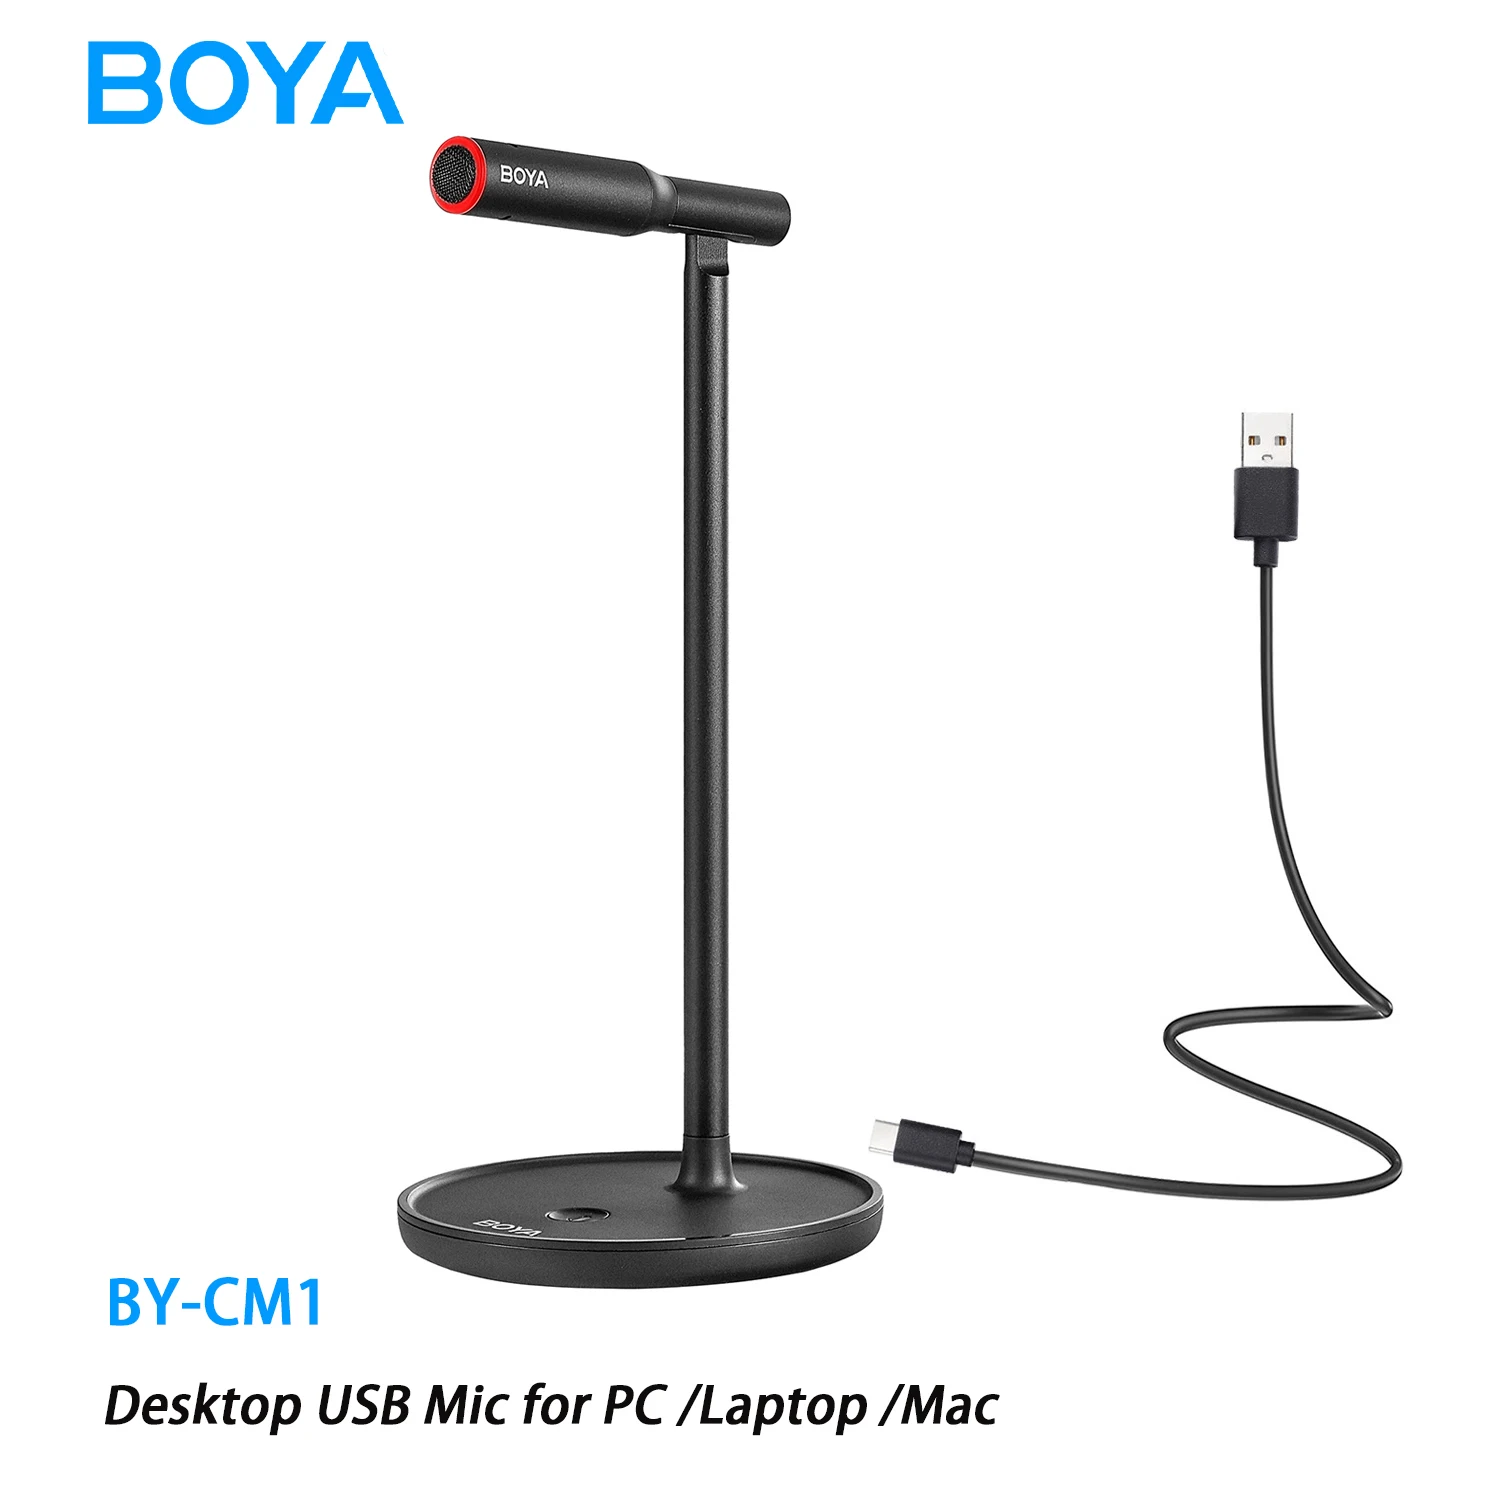 

BOYA BY-CM1 USB Microphone Desktop Mic for PC Computer Mac Laptop YouTube Recording Podcast Studio Blogger Streaming Meeting